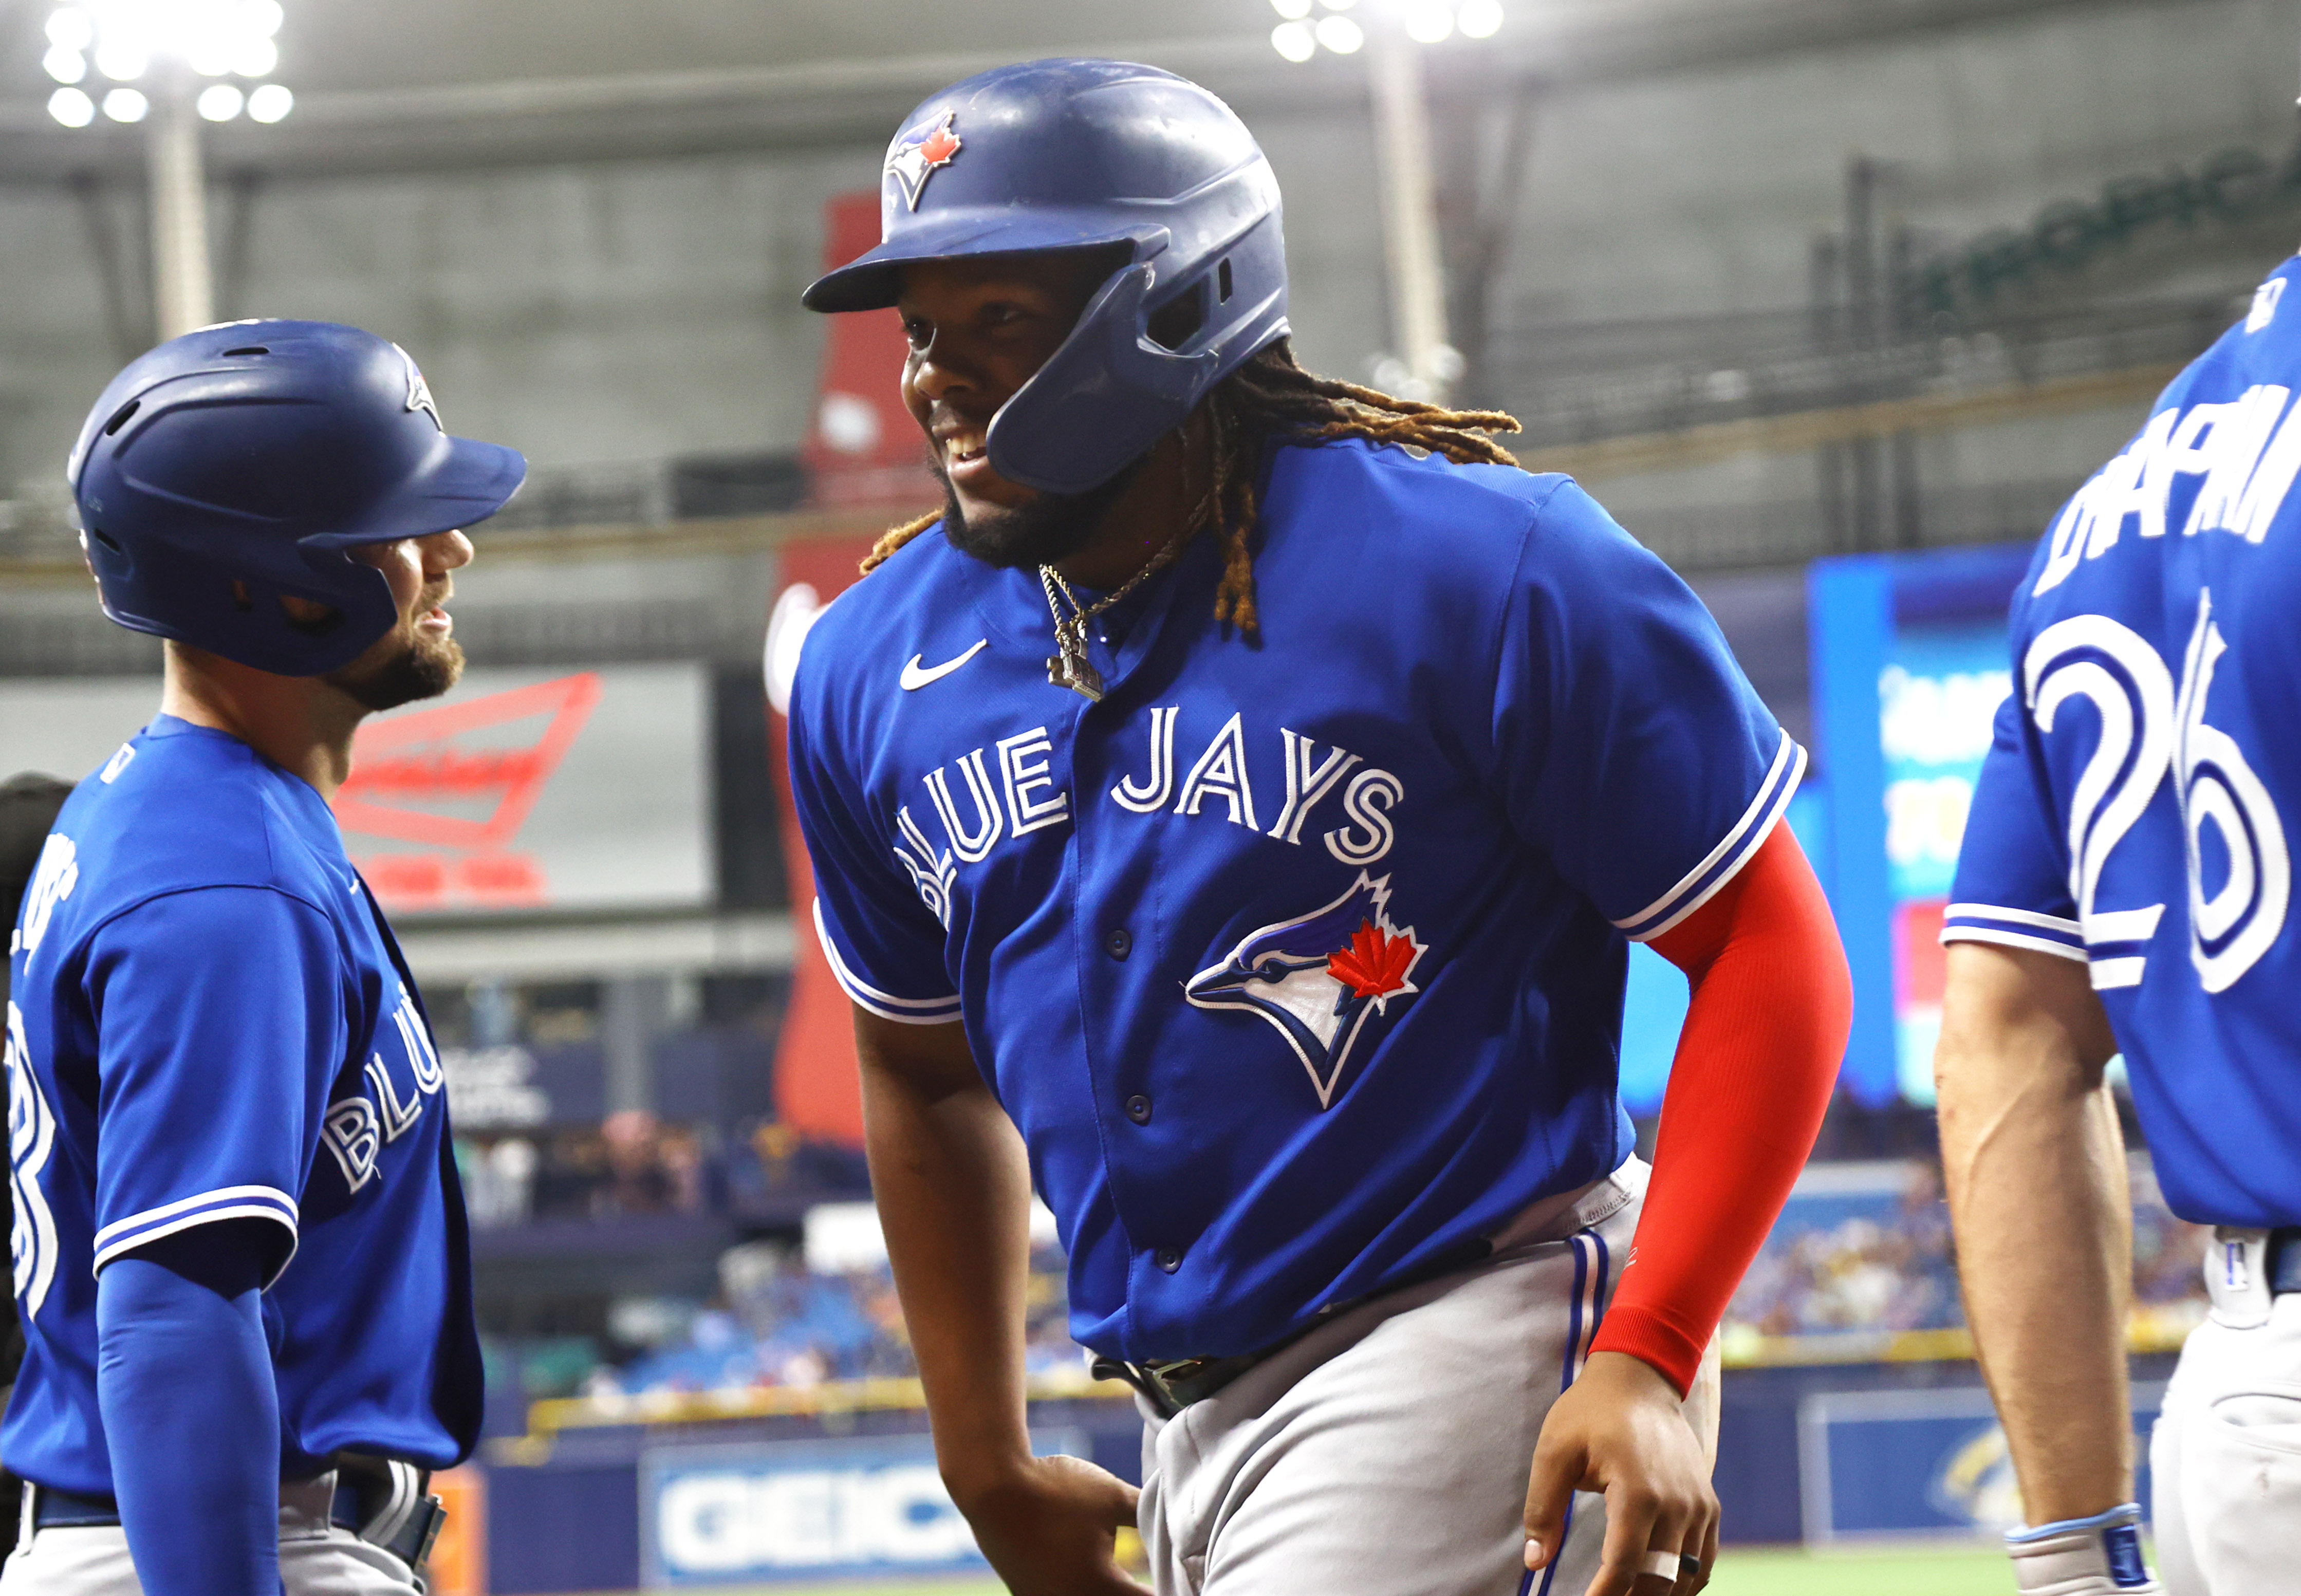 MLB notebook: Intriguing series this weekend; rise of Blue Jays; Braves- Orioles hitting century mark